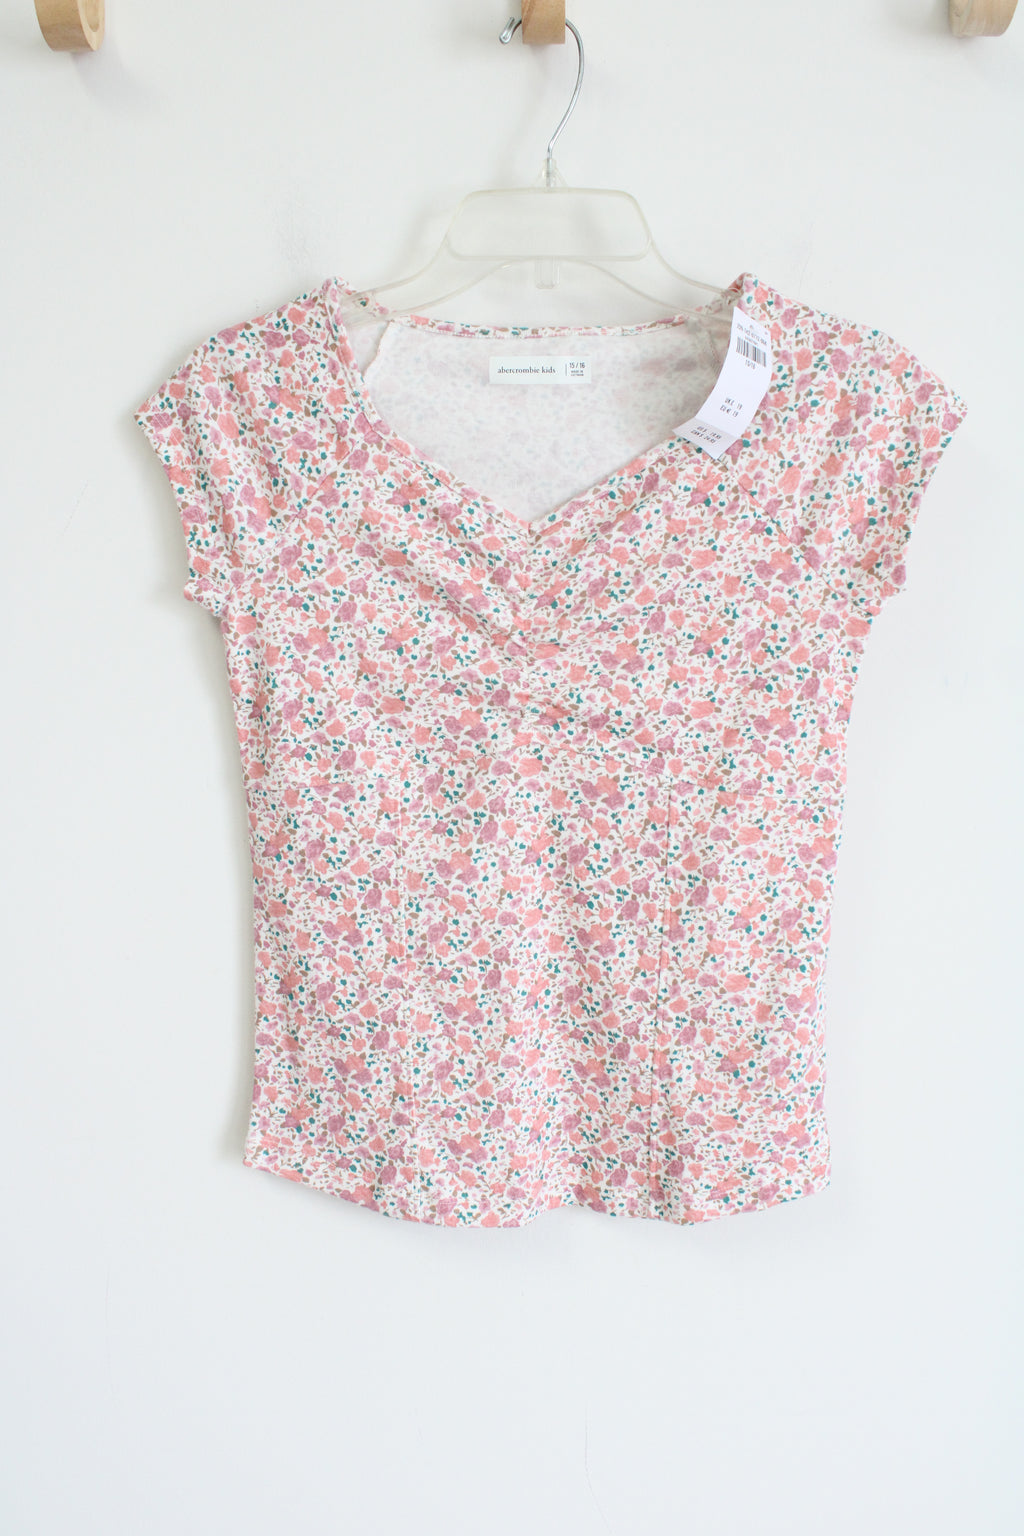 NEW Abercrombie & Fitch Pink Floral Top | 15/16